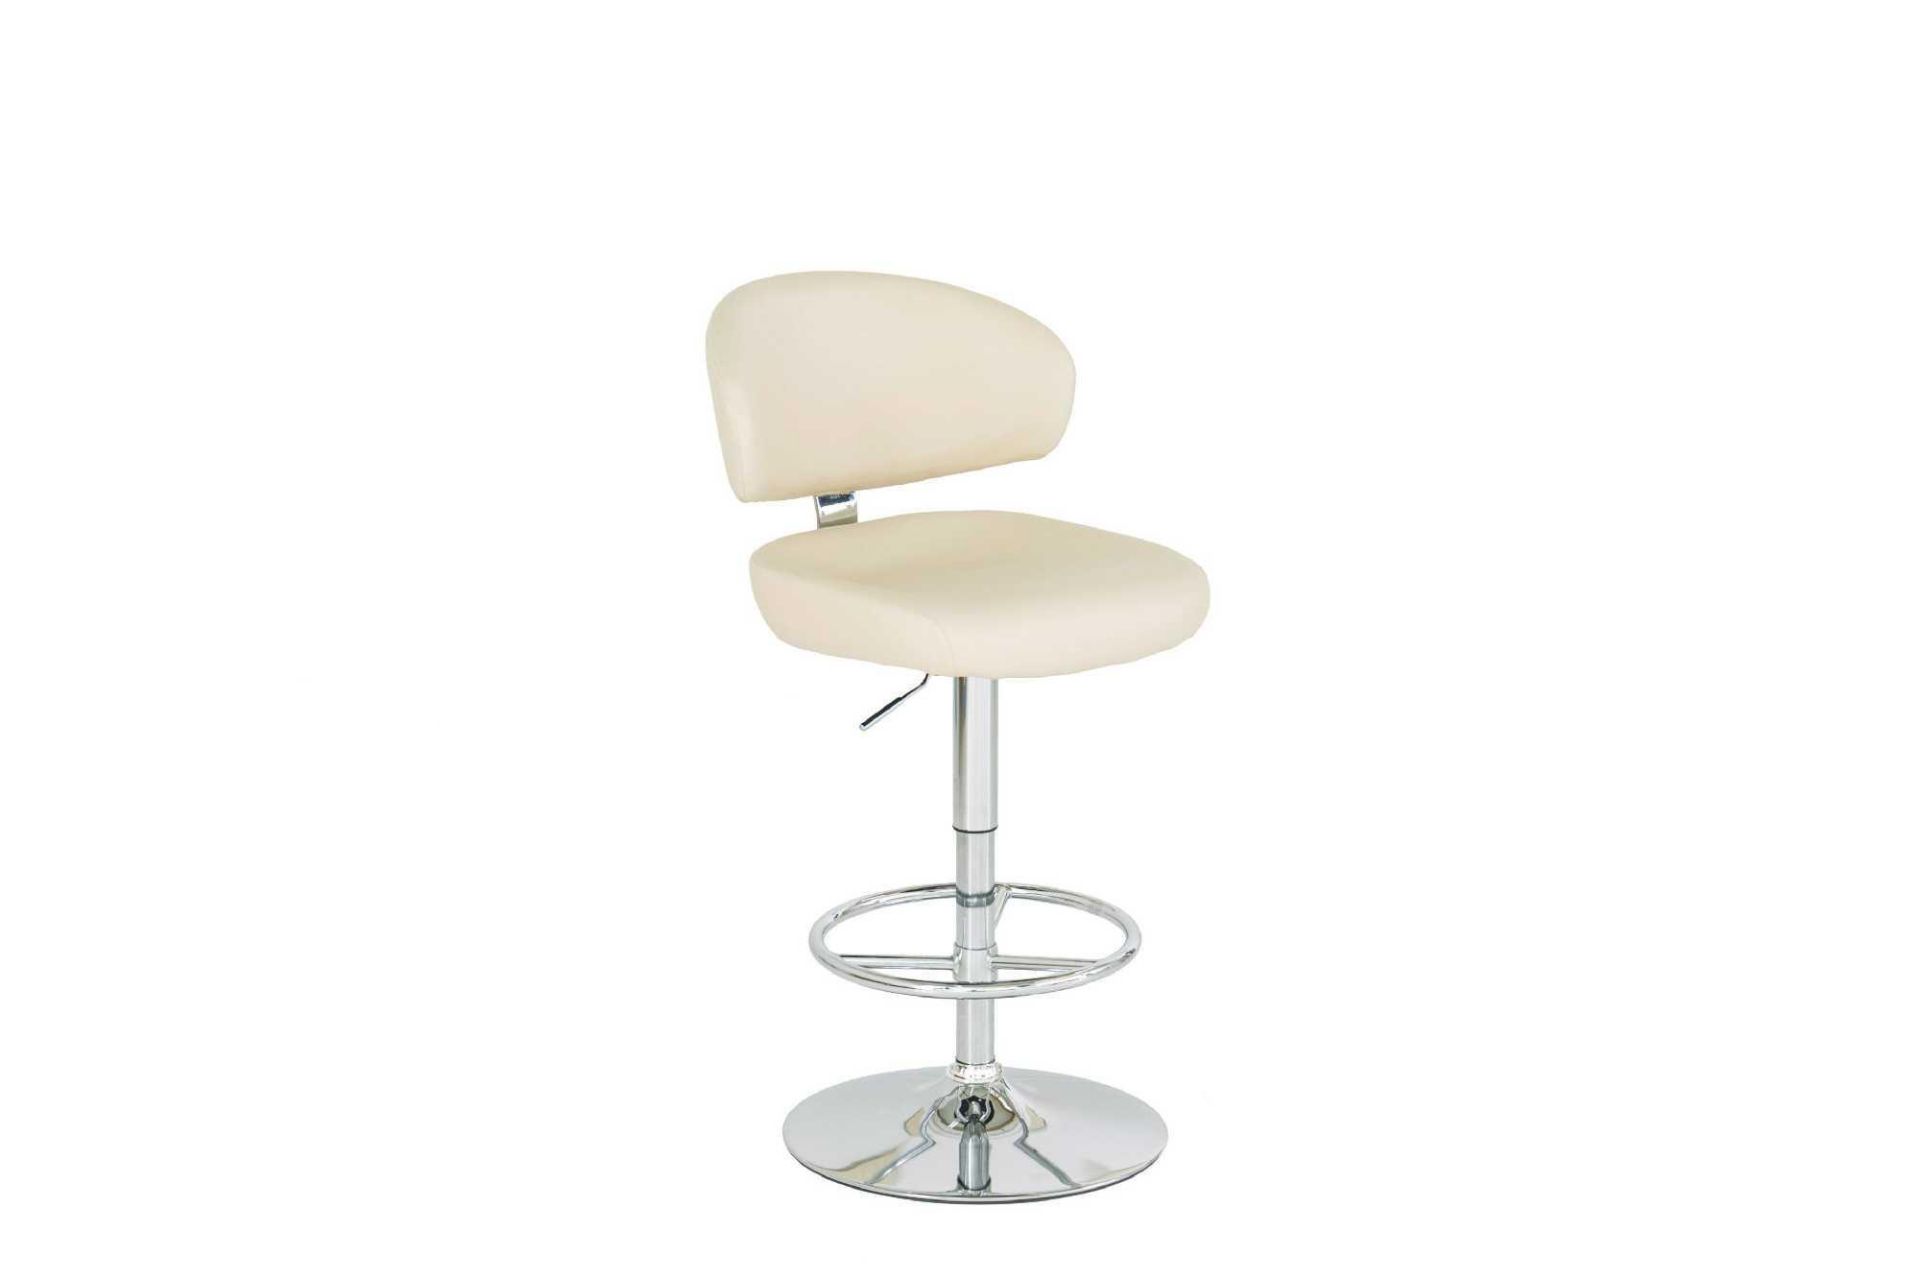 RRP £100 - New 'Bingo' Cream Barstool In Faux Leather With Chrome Base